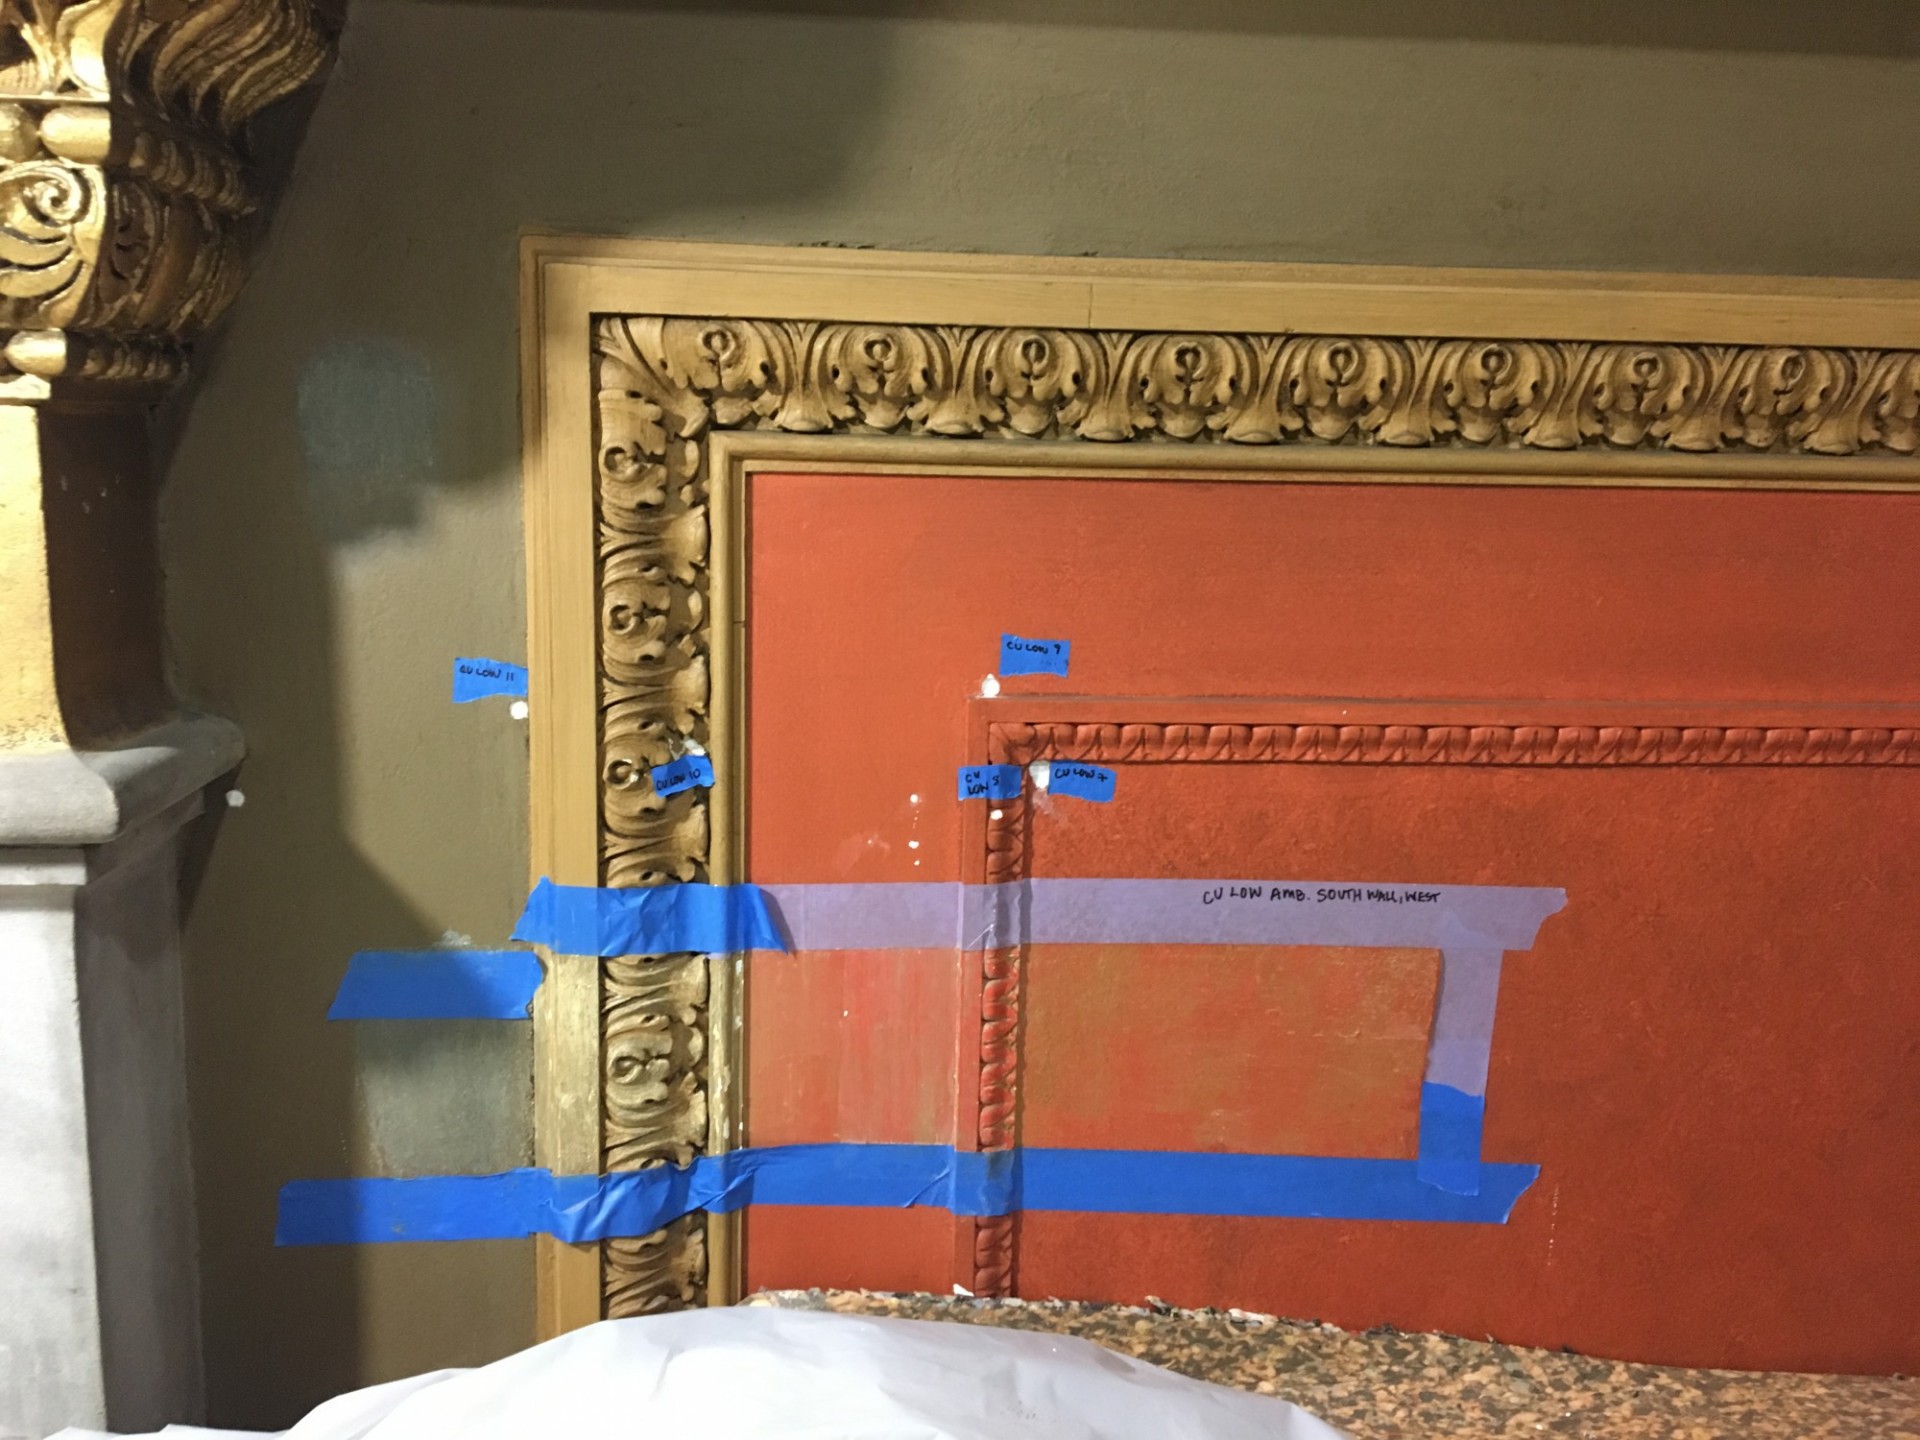 A red orange section of the wall being being investigated to determine the correct paint color.